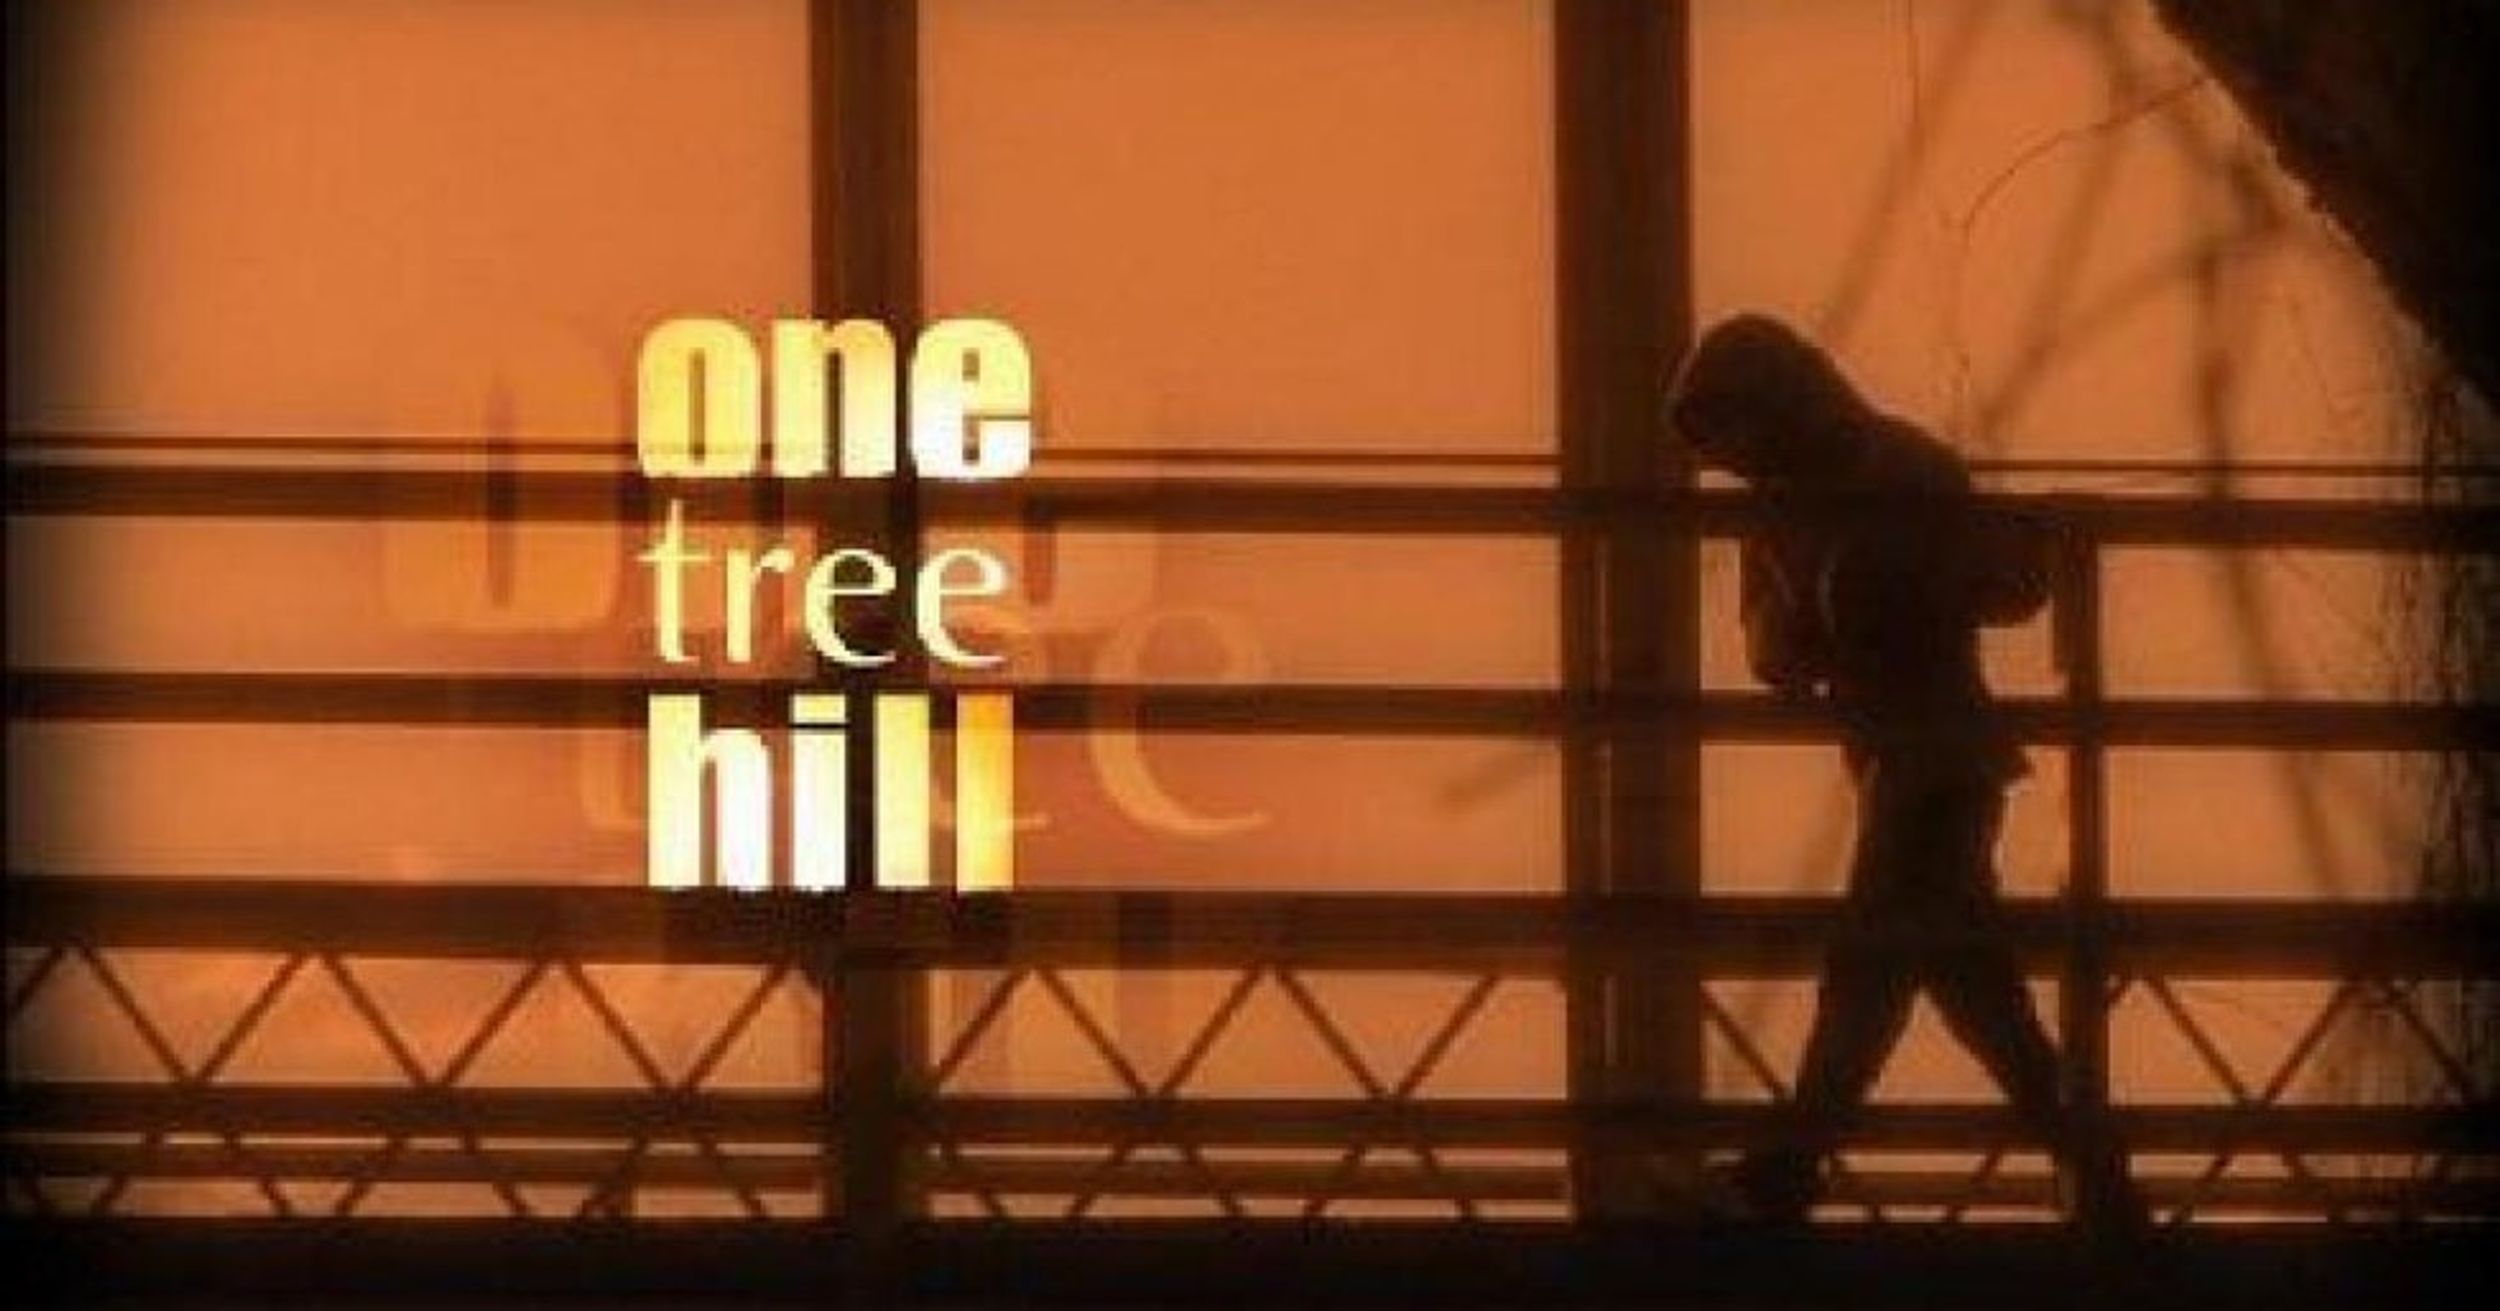 10 One Tree Hill Quotes To Prepare You For This Upcoming Semester